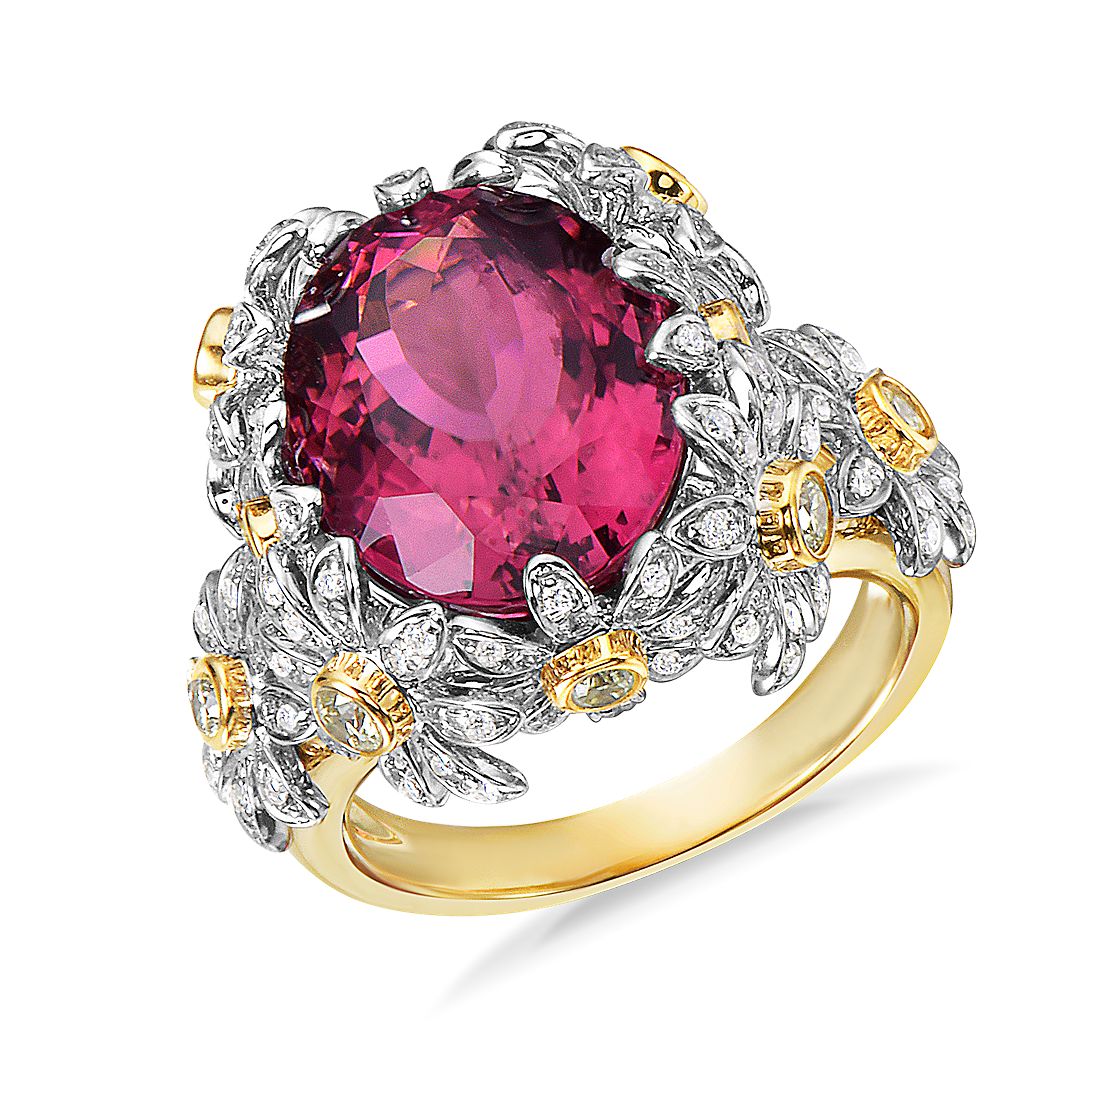 Oval Rubellite Tourmaline and Diamond Floral Ring in 18k White and Yellow Gold (14.5x11.5mm)